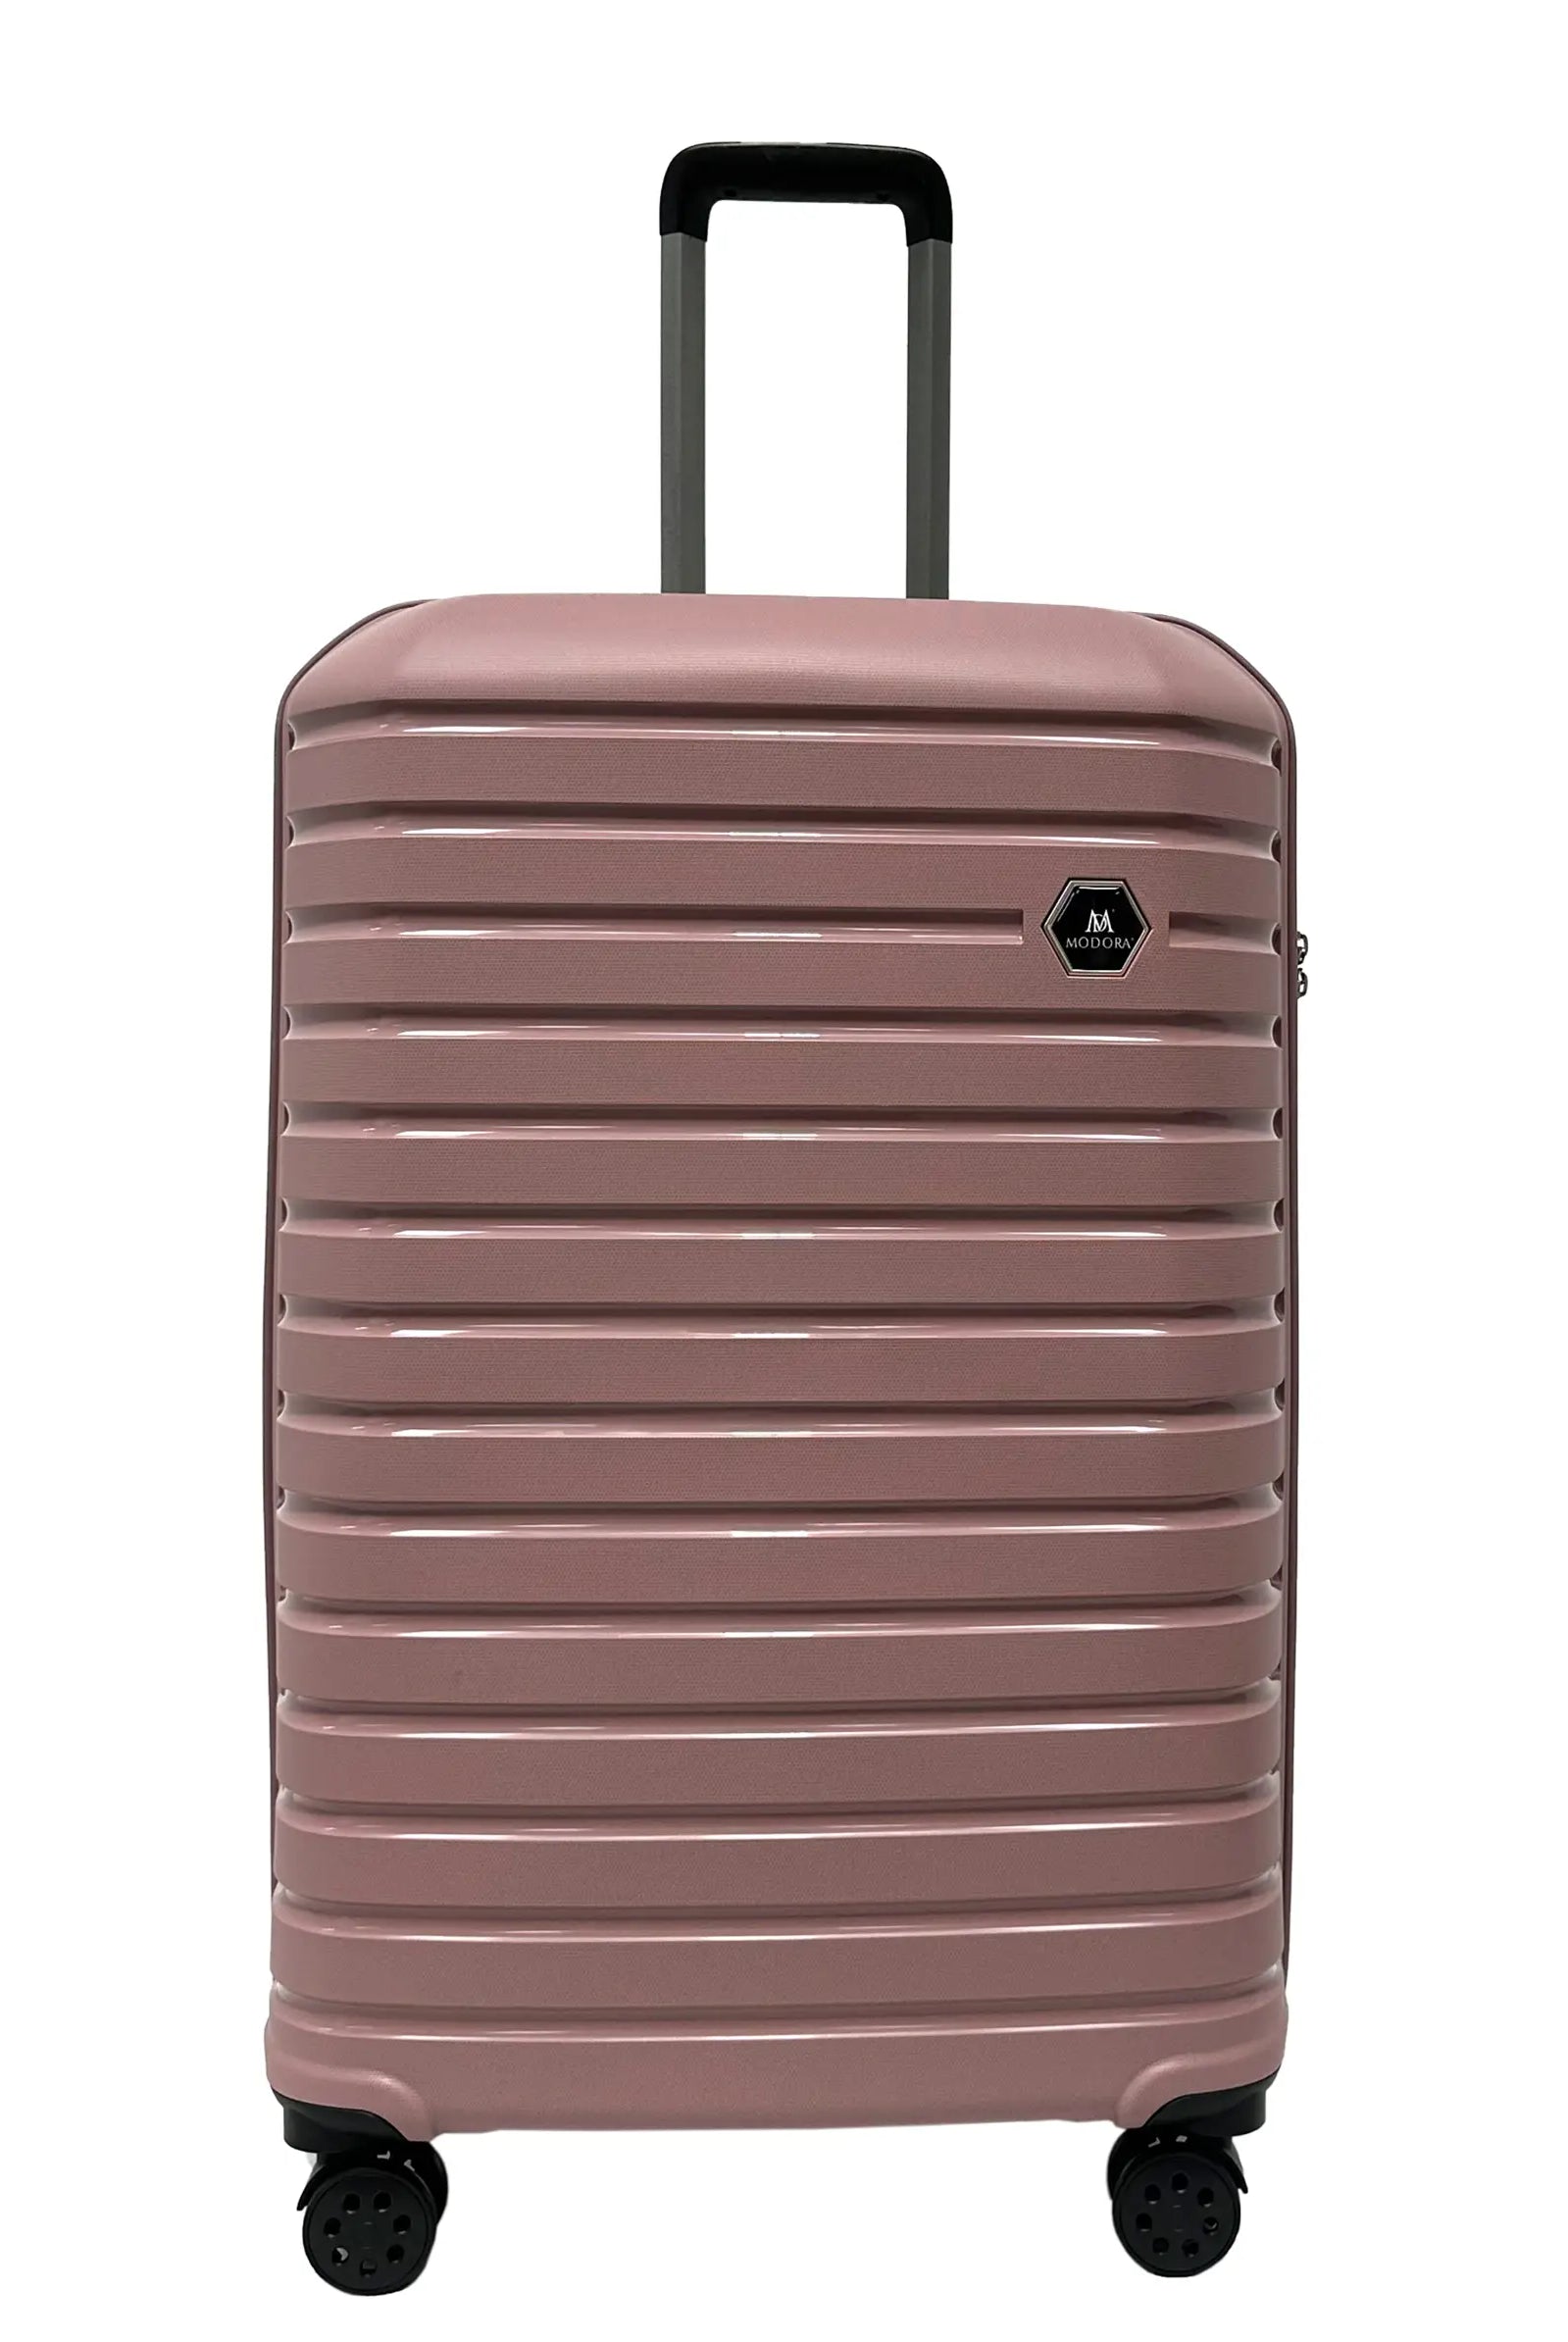 Powder large suitcase with wheels